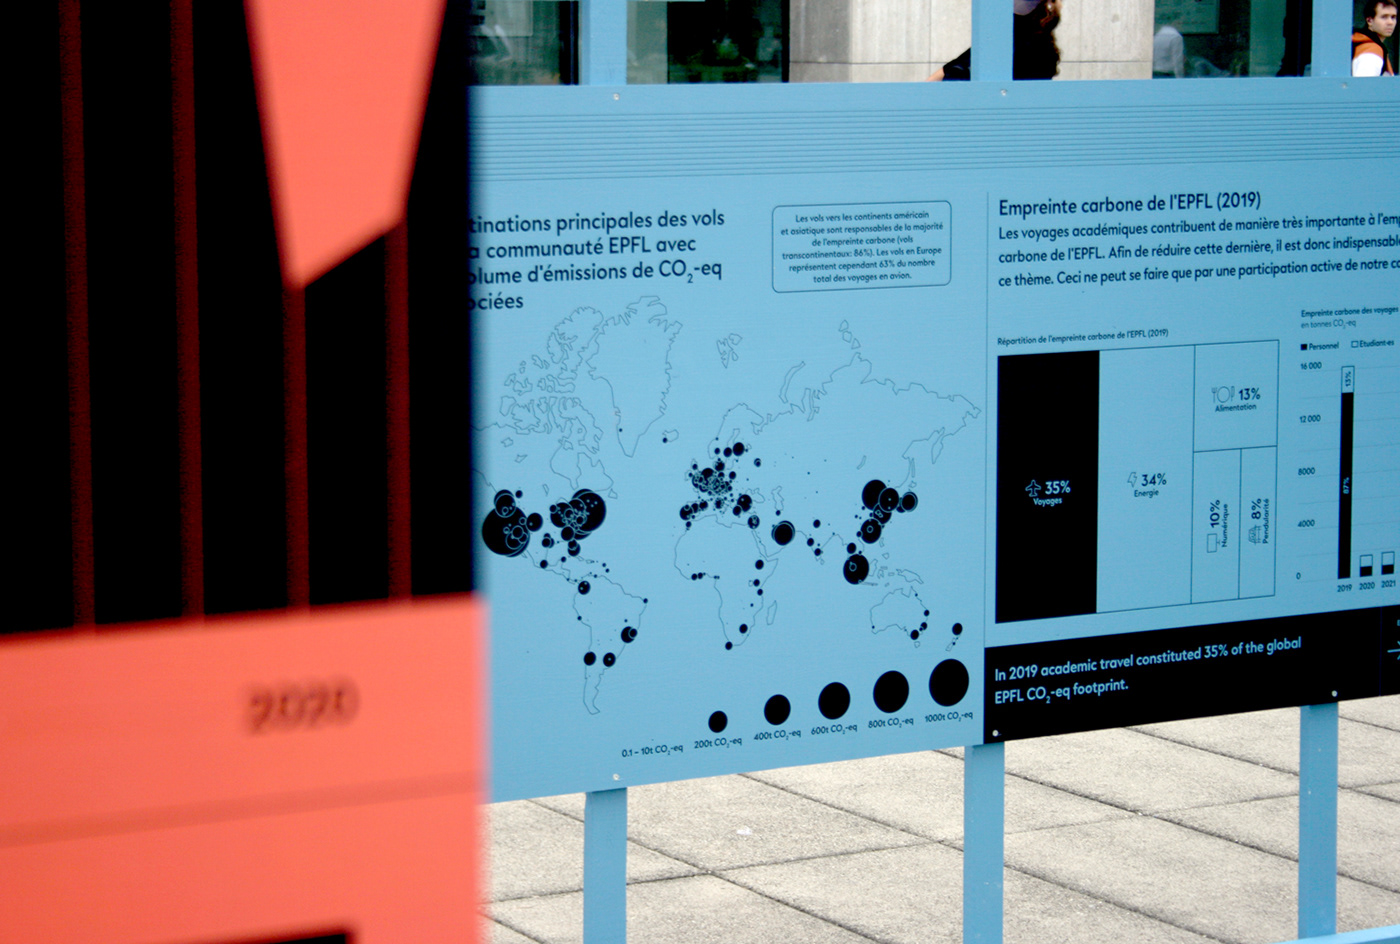 data visualization infographic sculpture cube Travel plane Sustainability climate change wood science